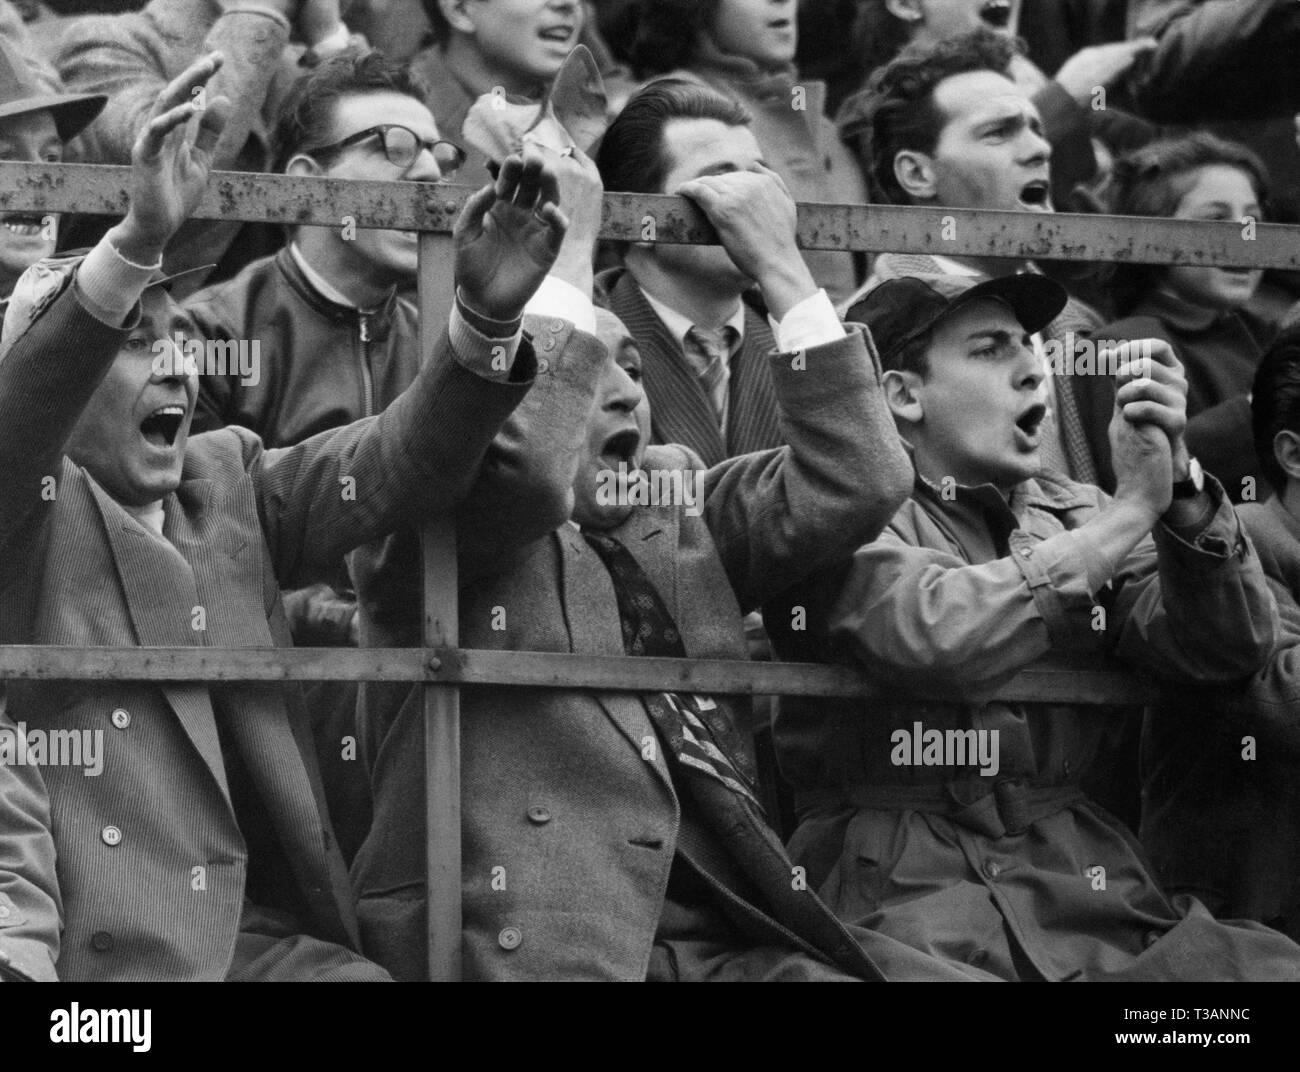 supporters at the stadium, 1963 Stock Photo